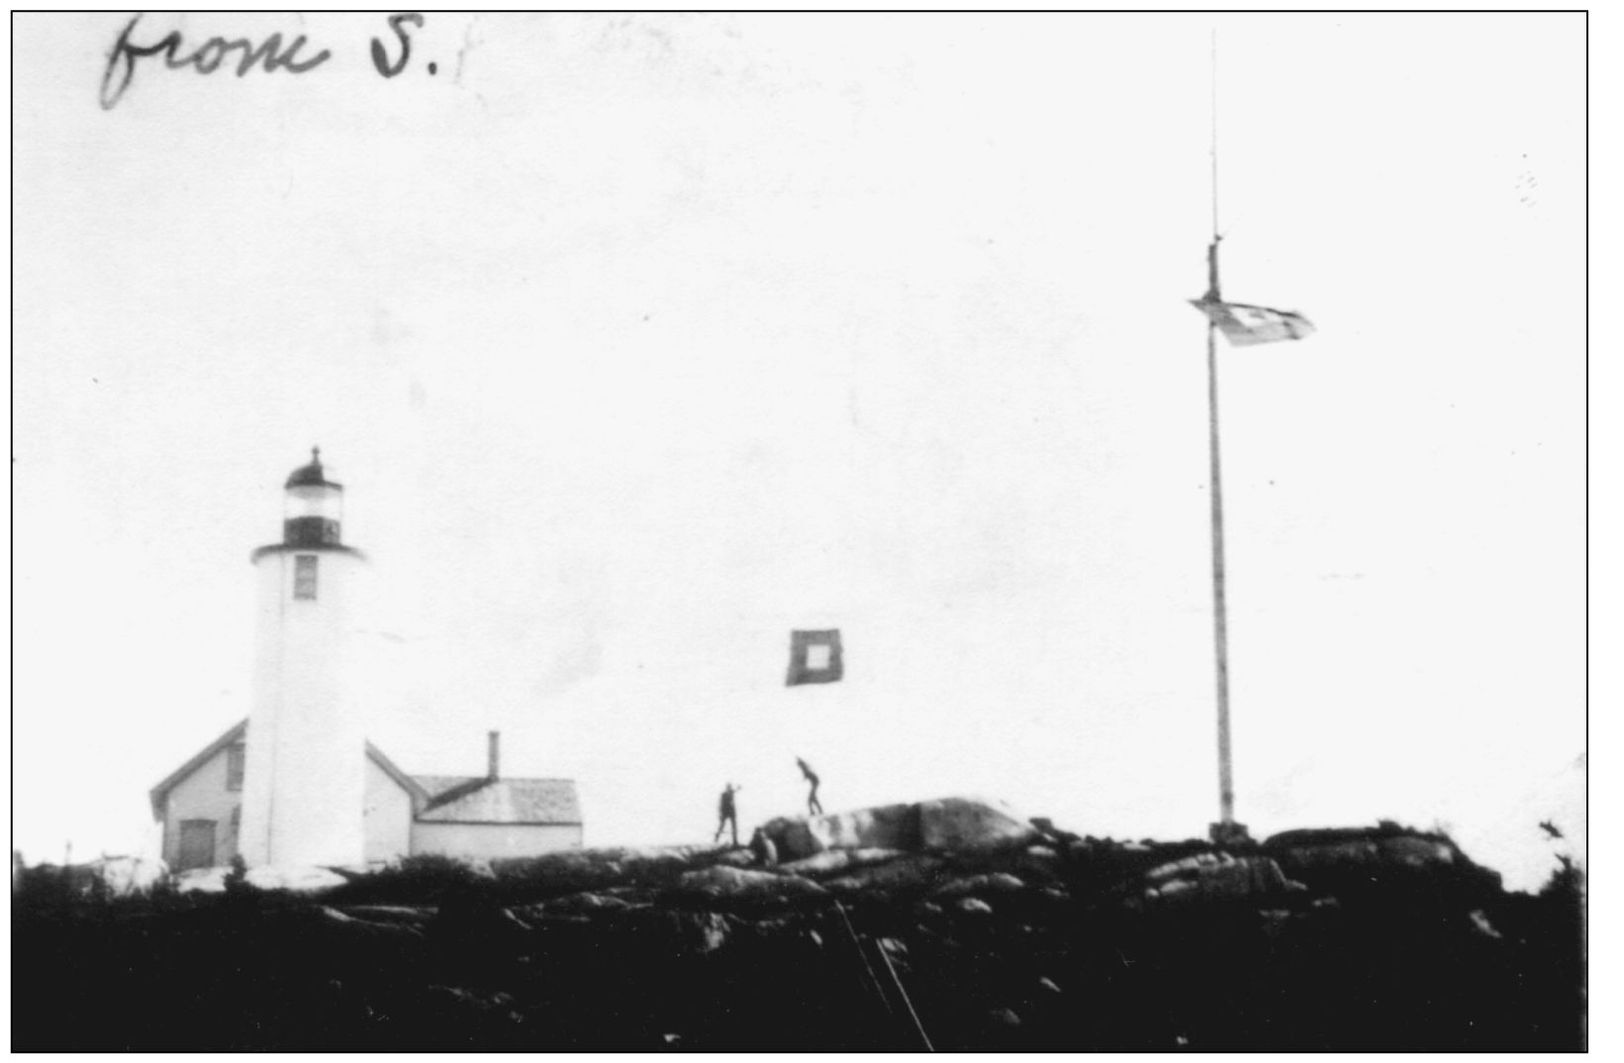 The government may have been testing a system of signal flags at Baker Island - photo 4